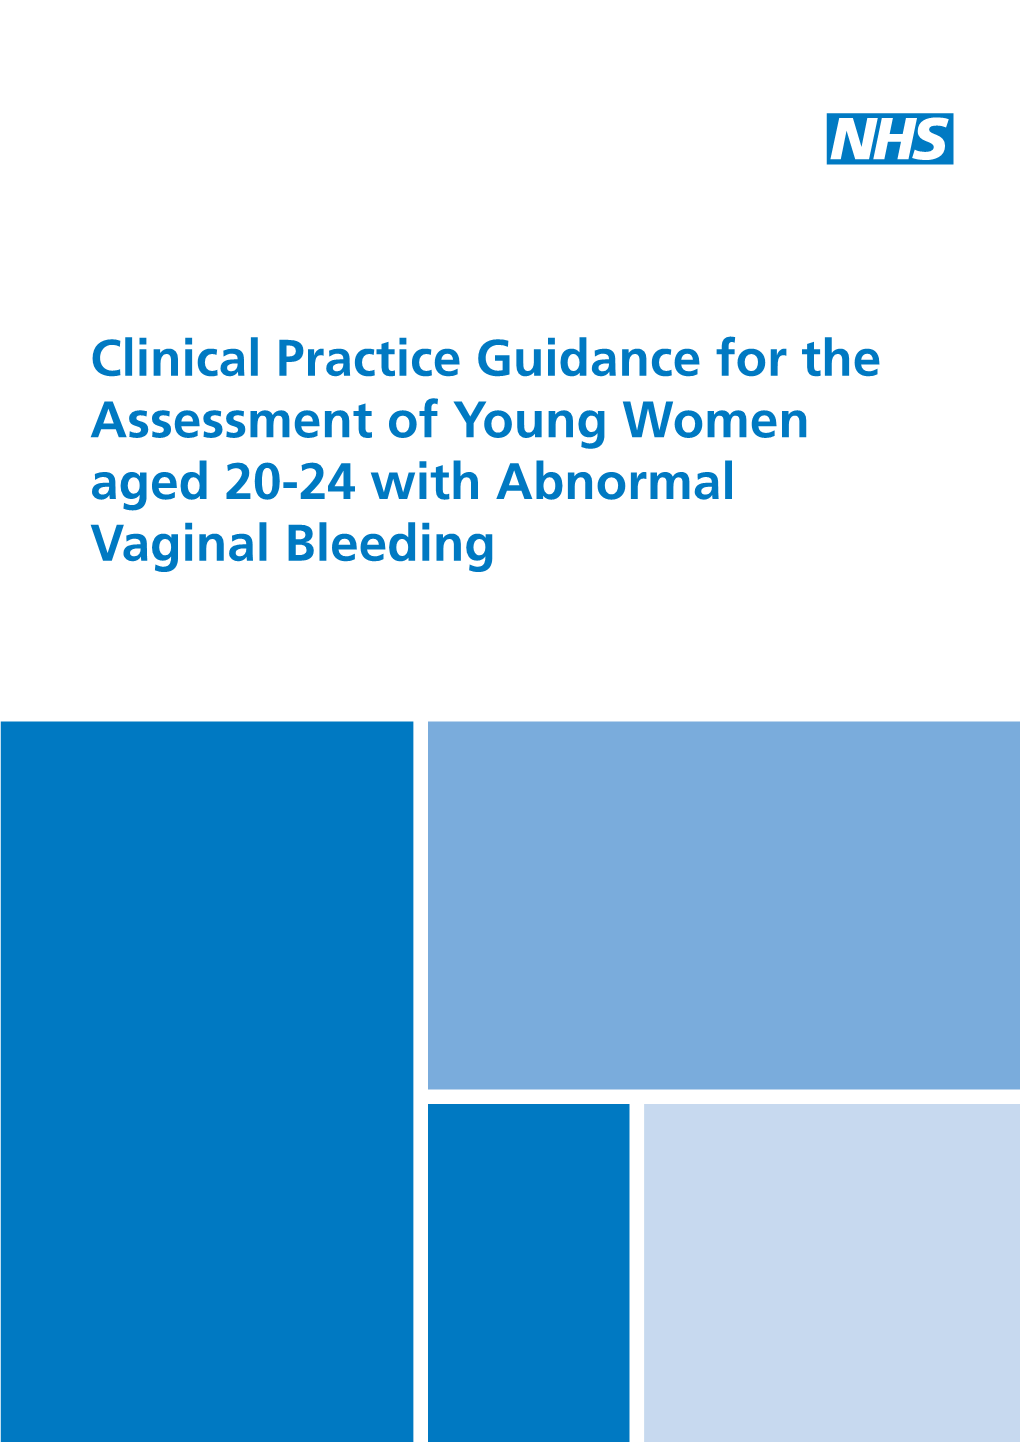 Clinical Practice Guidance for the Assessment of Young Women Aged 20-24 with Abnormal Vaginal Bleeding